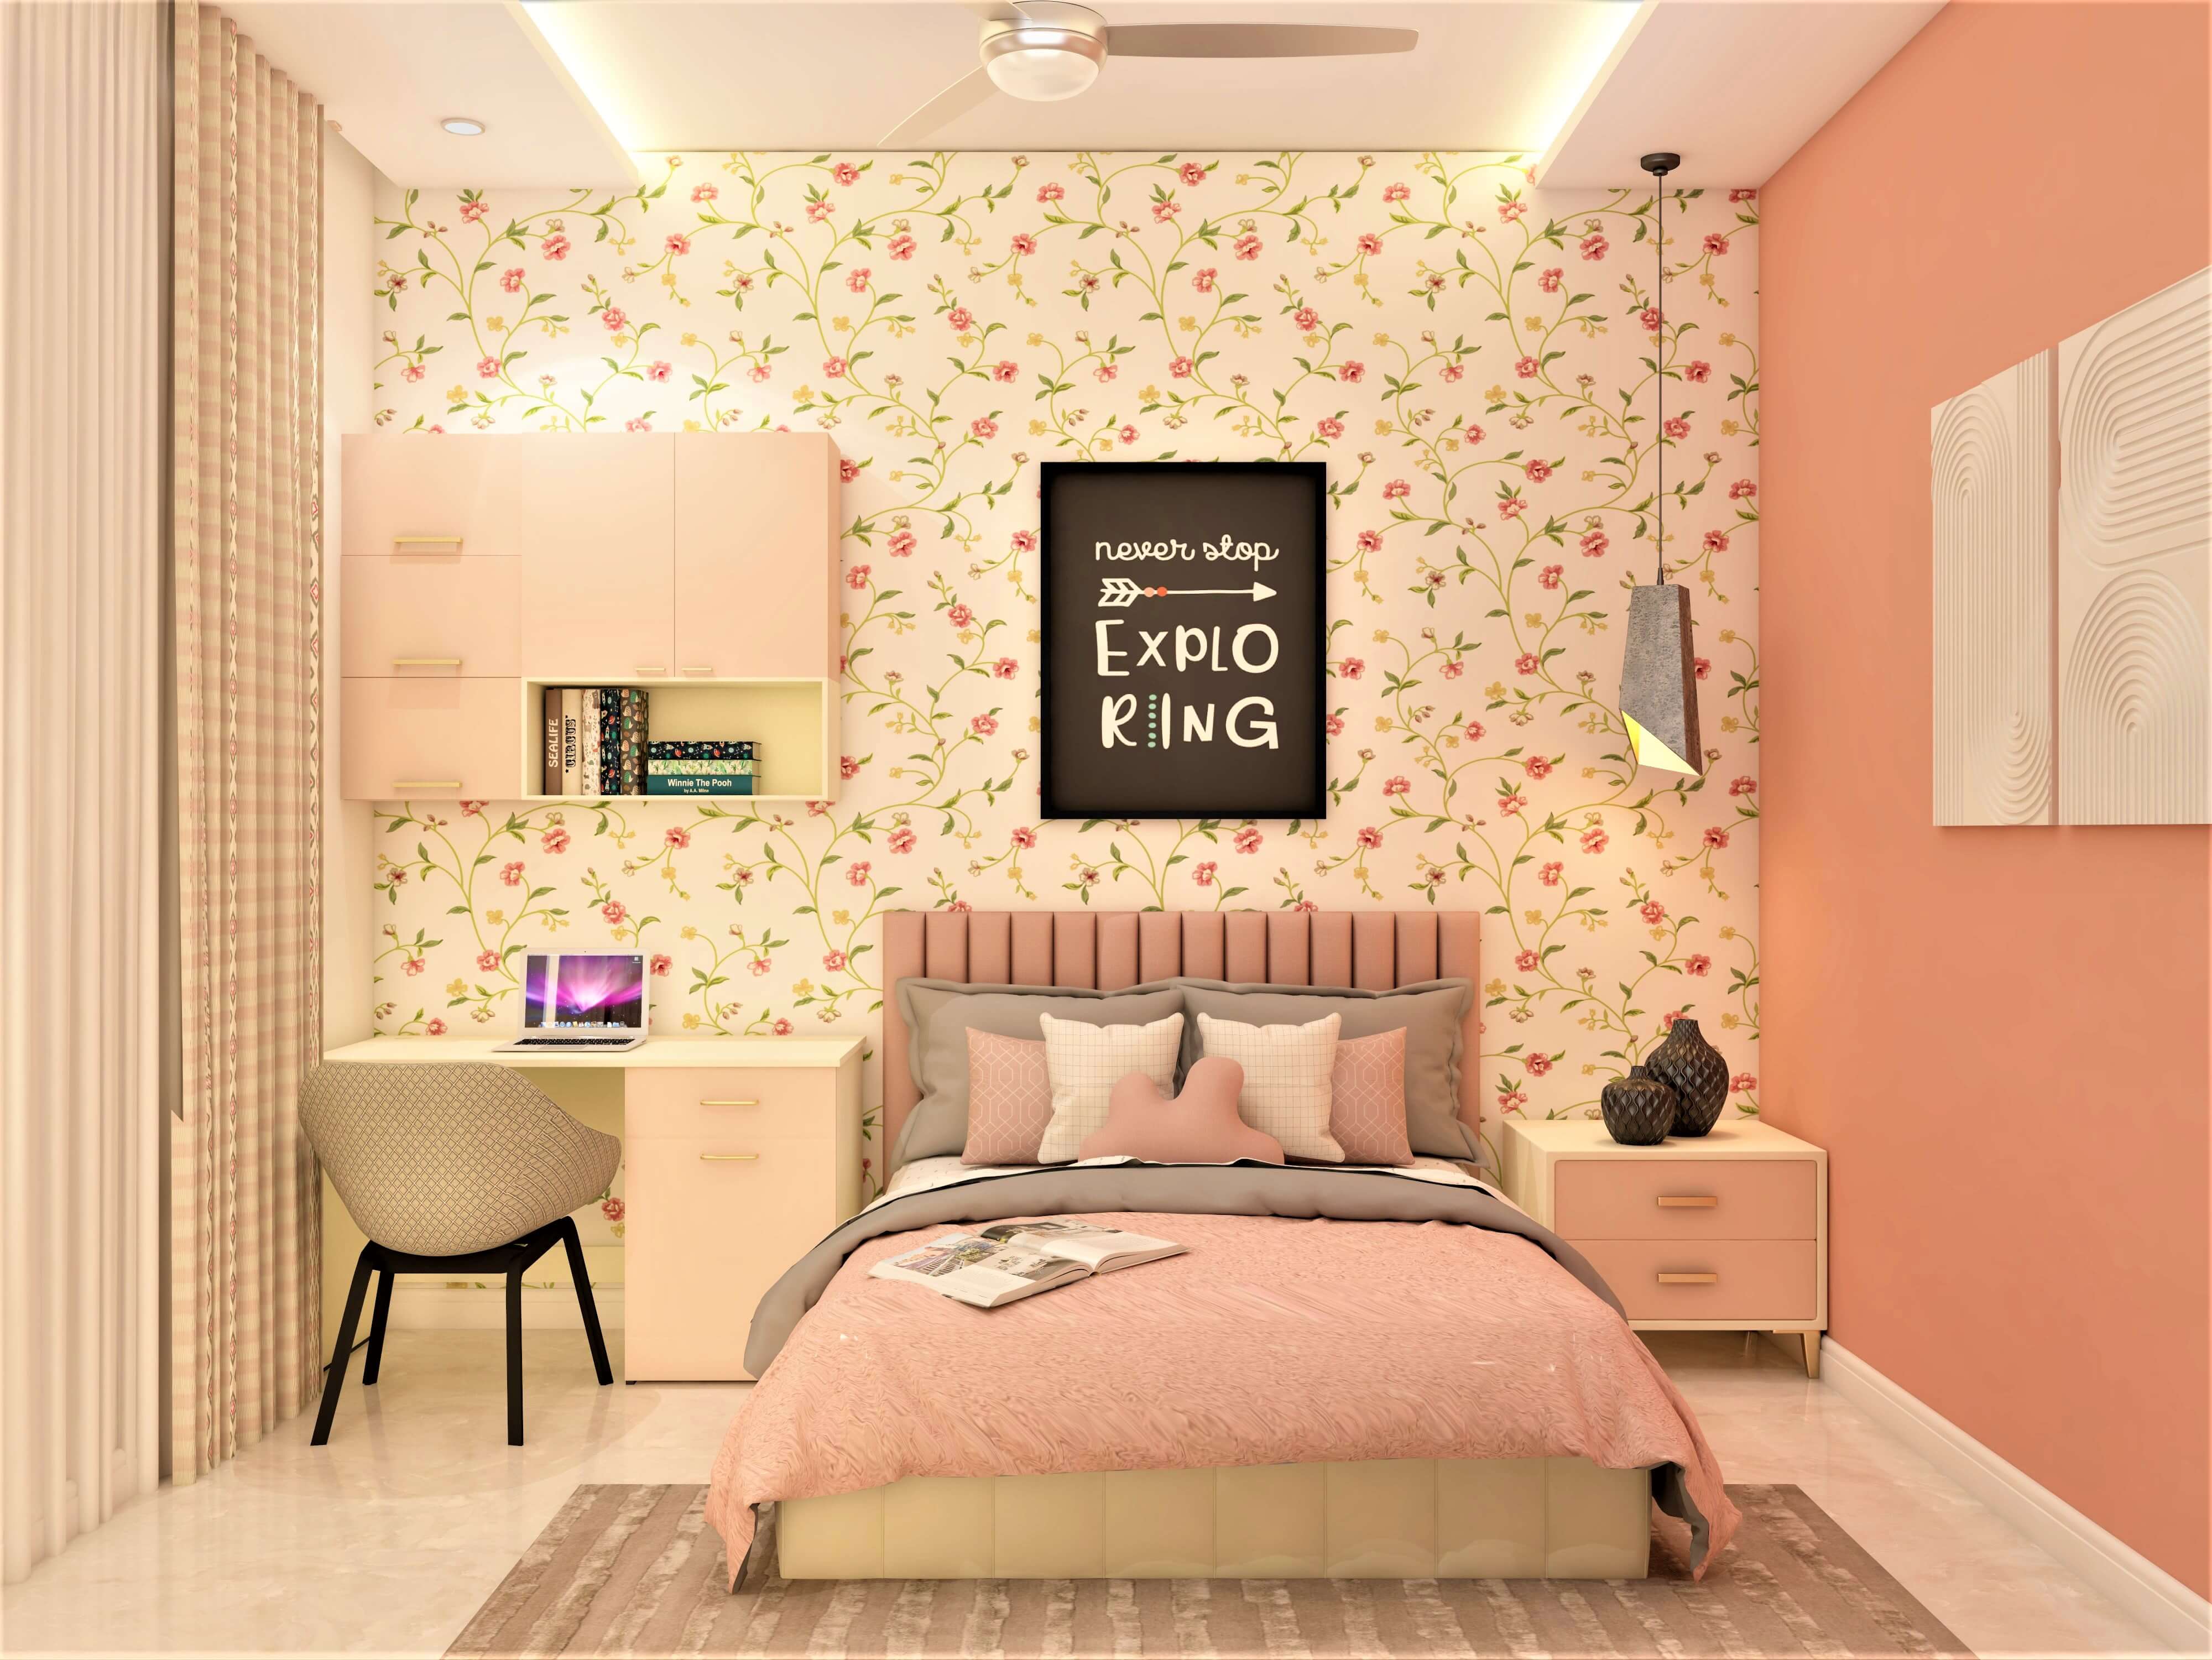 Contemporary kids bedroom design with a floral wallpaper - Beautiful Homes